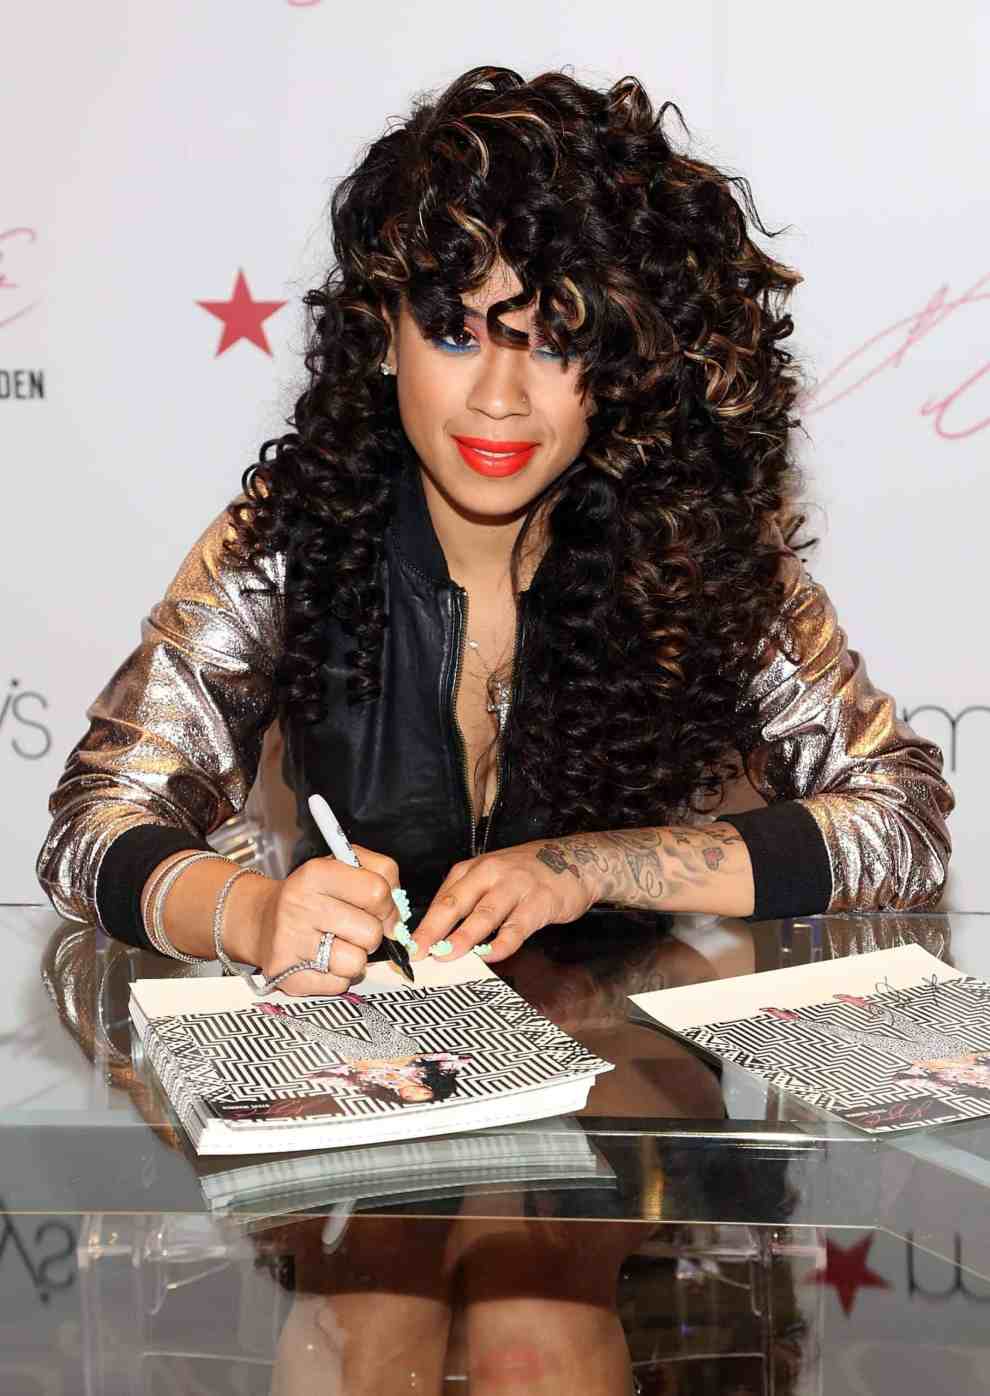 Keyshia Cole signs autographs at Macy's Herald Square 2016